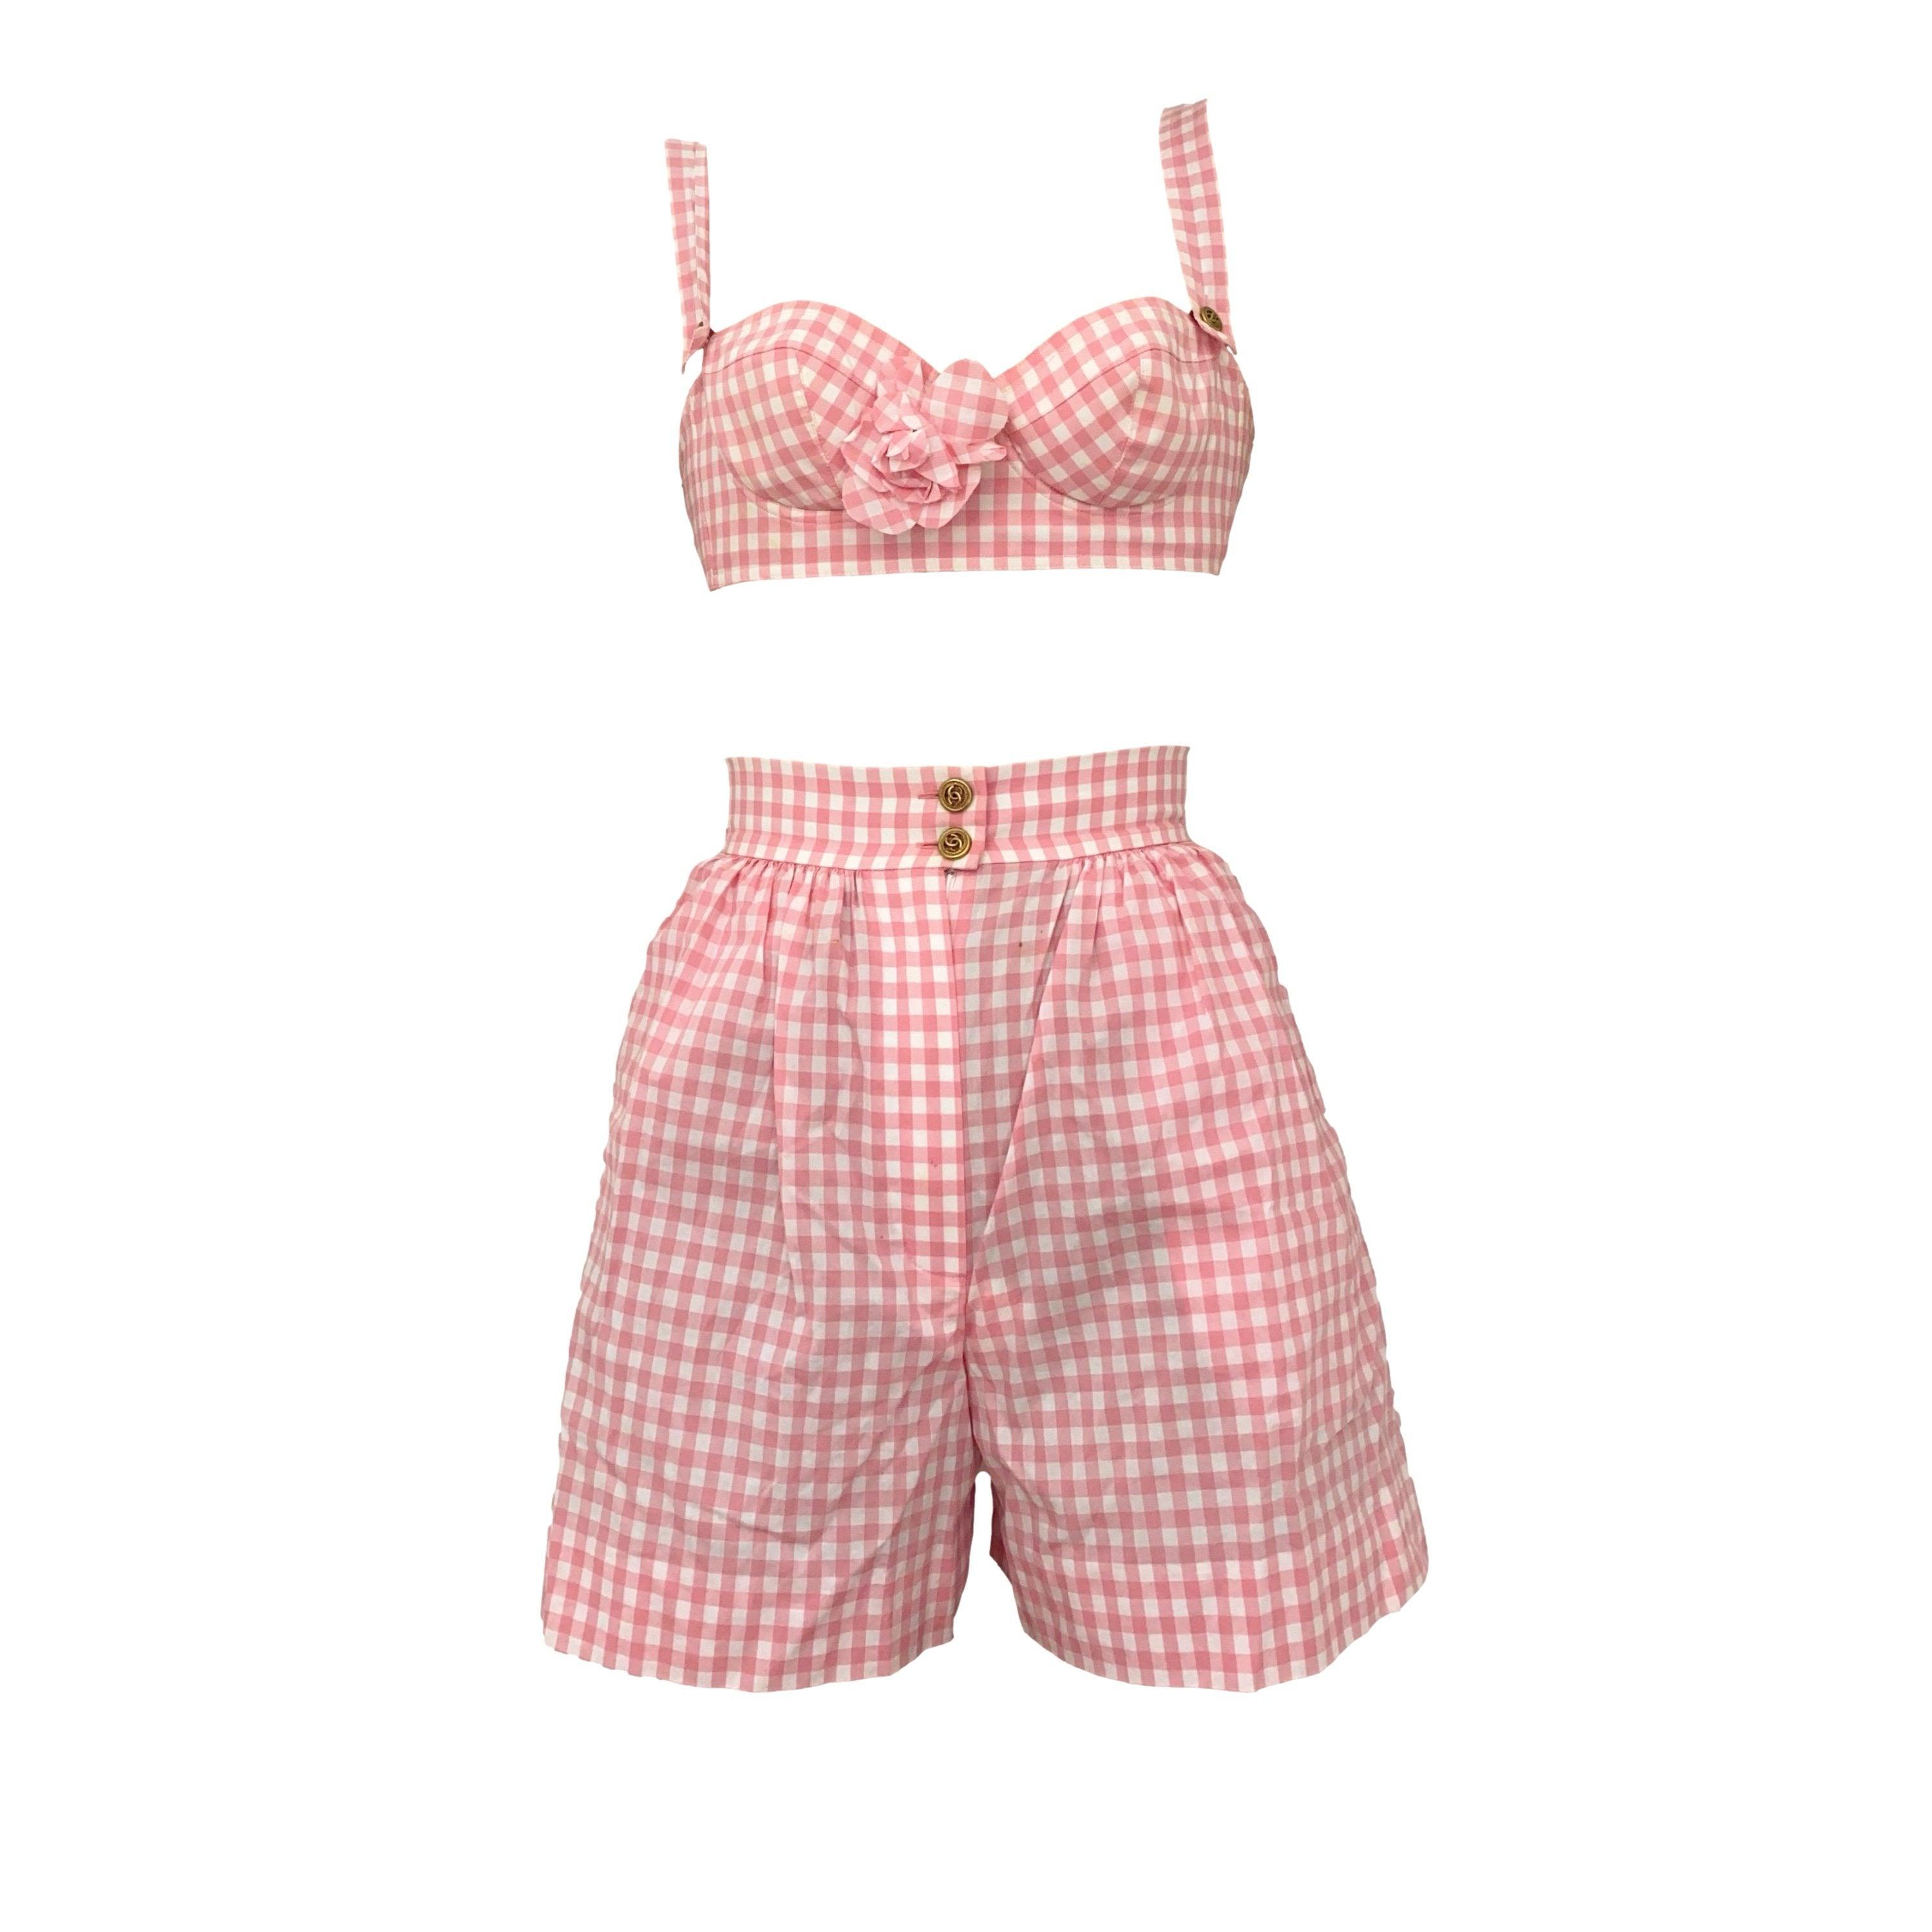 Treasures of NYC - Chanel Pink Gingham Short Set